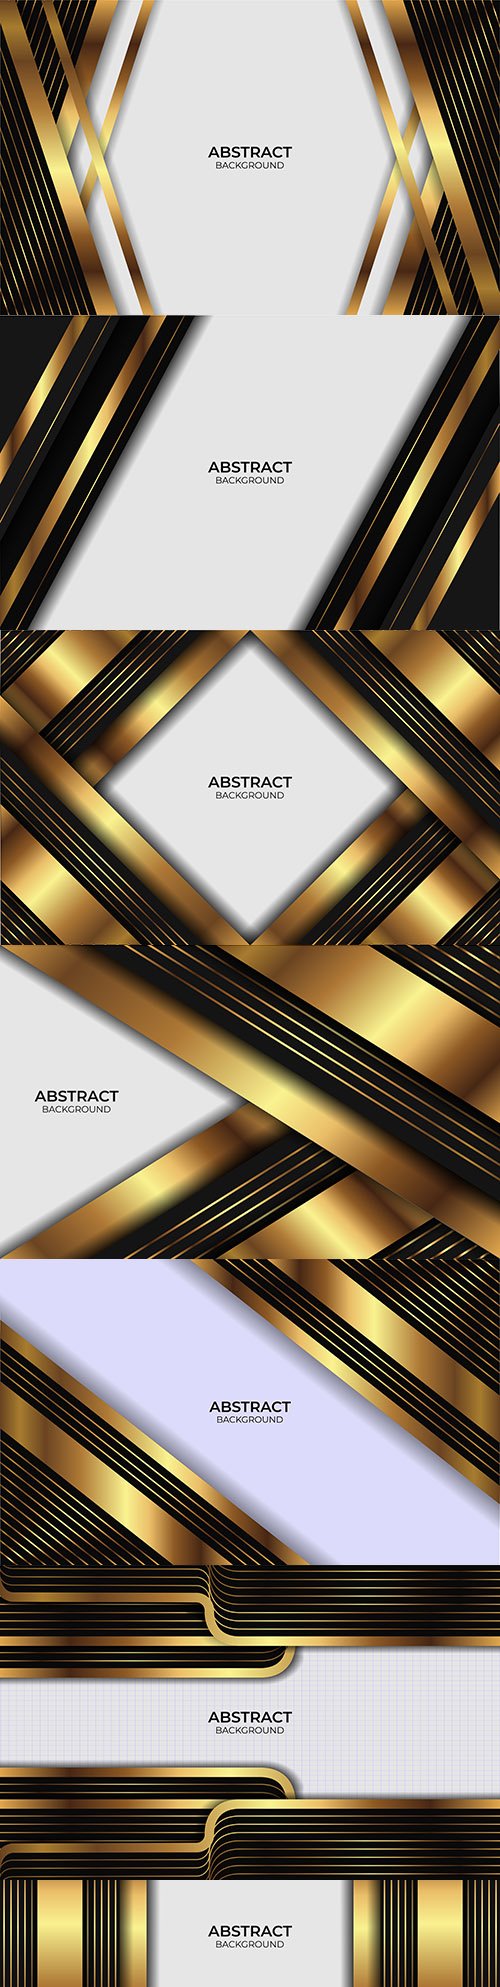 Luxury gold and black design background